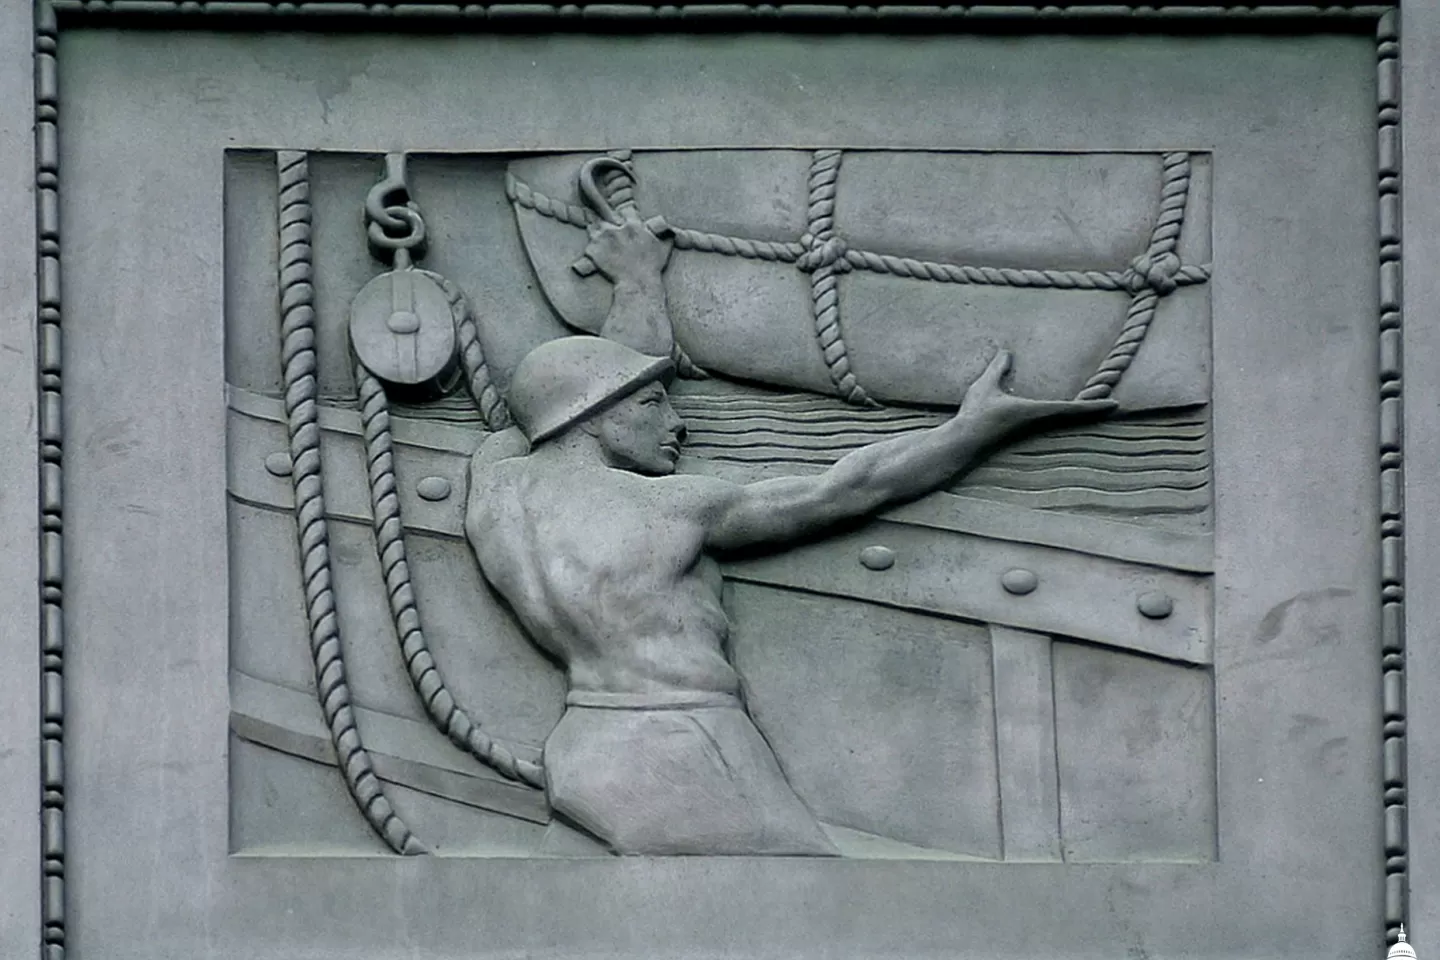 A sailor maneuvers cargo in a panel on exterior of the Dirksen Senate Office Building. 